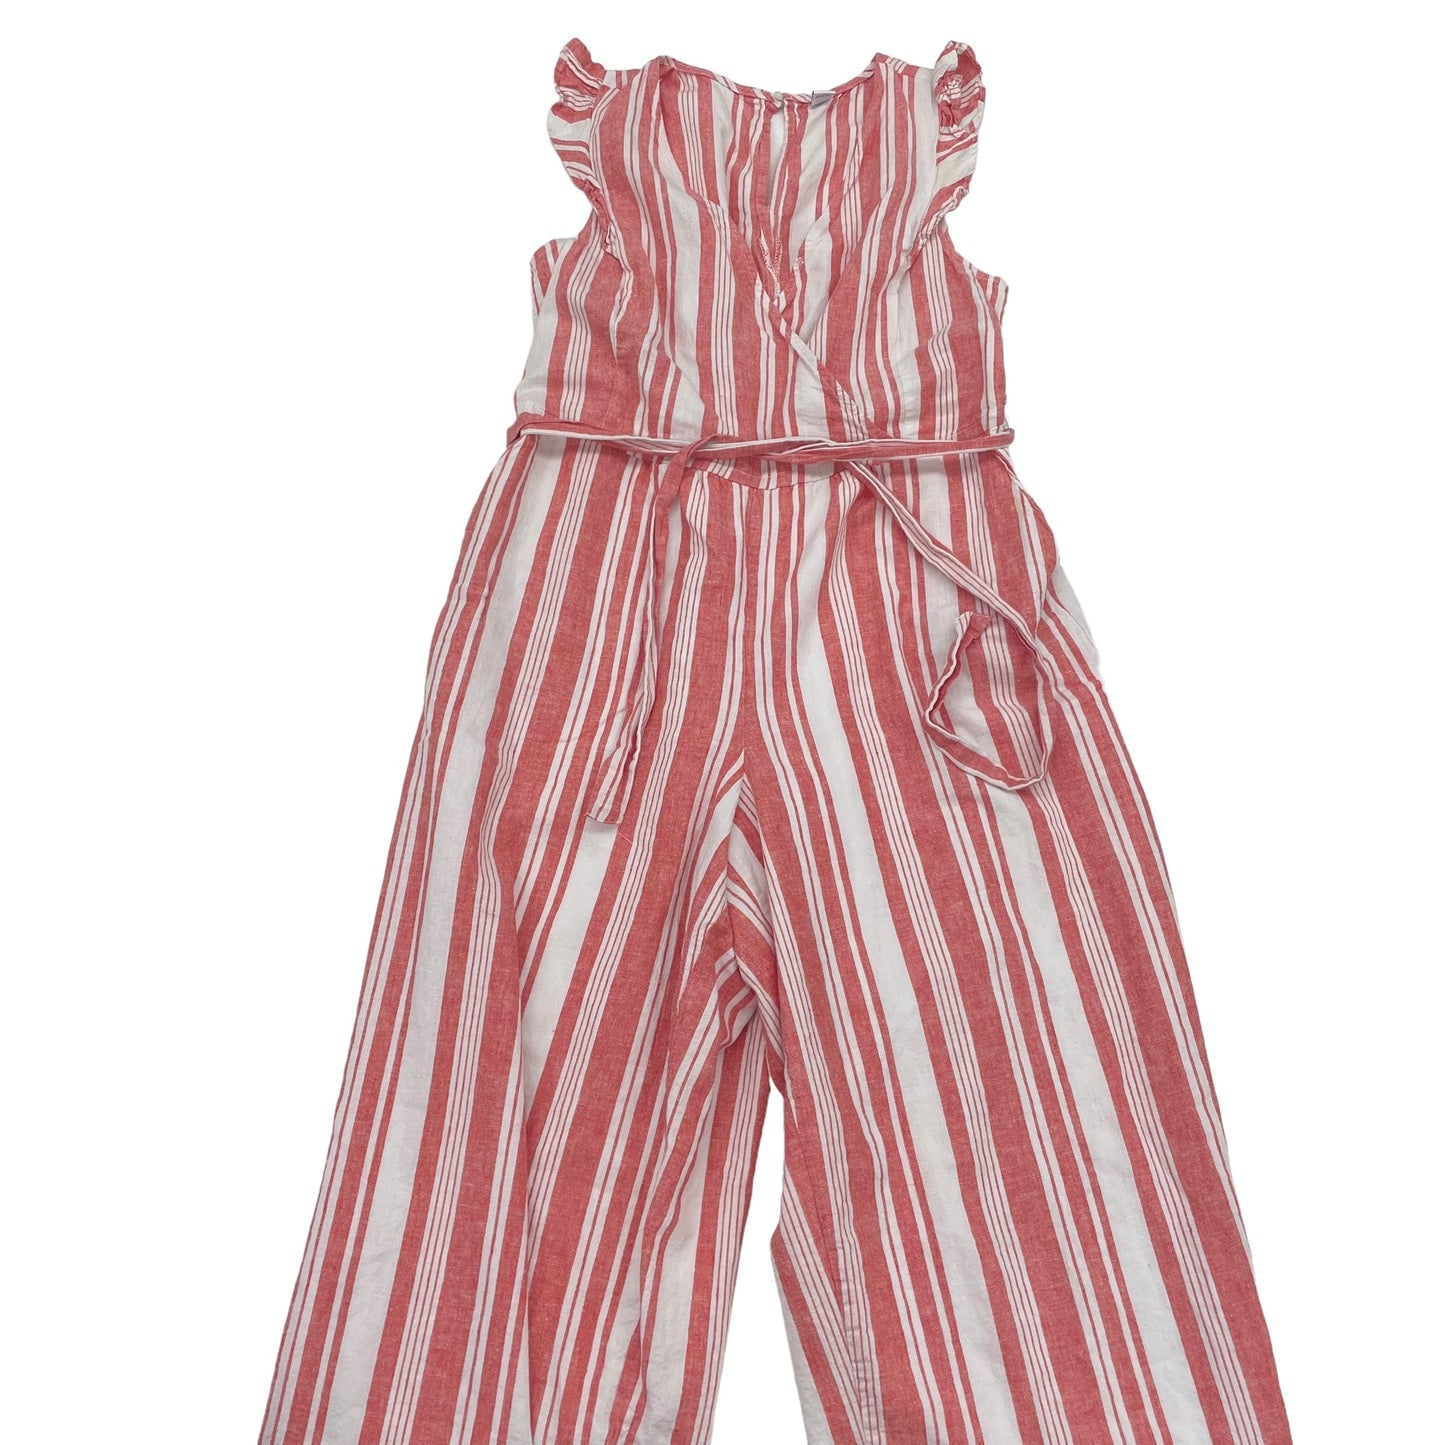 Red & White Jumpsuit Old Navy, Size L